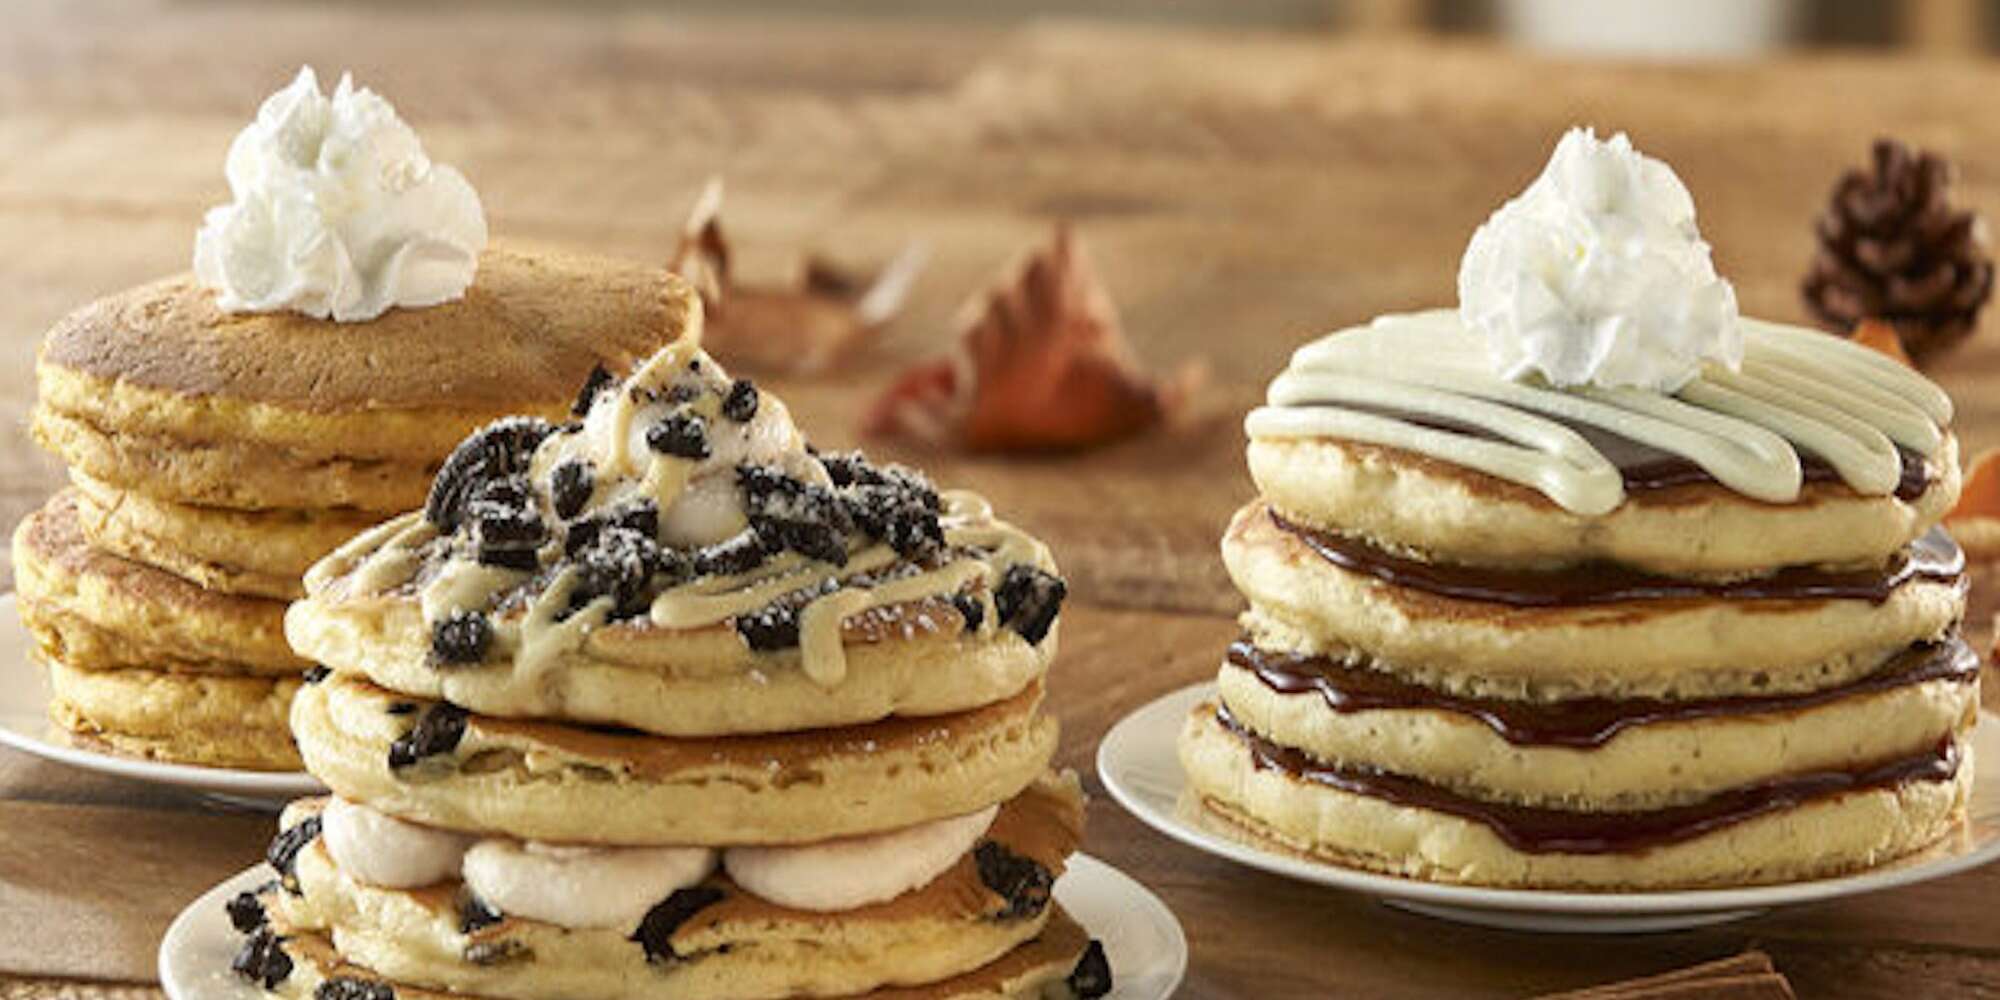 IHOP Reveals Their New Spring Menu with Protein Pancakes and a